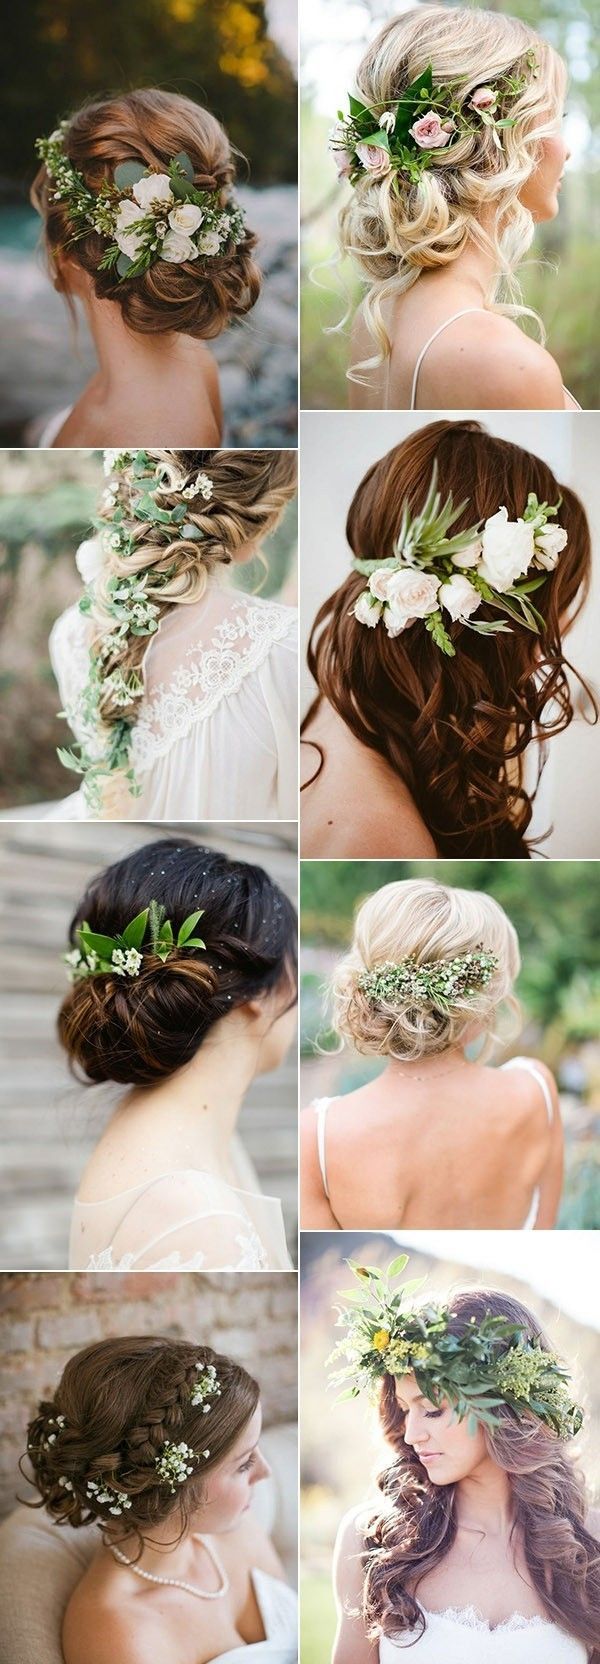 Boho-Wedding-101-inspiration-ideas-for-the-most-beautiful-day.jpg